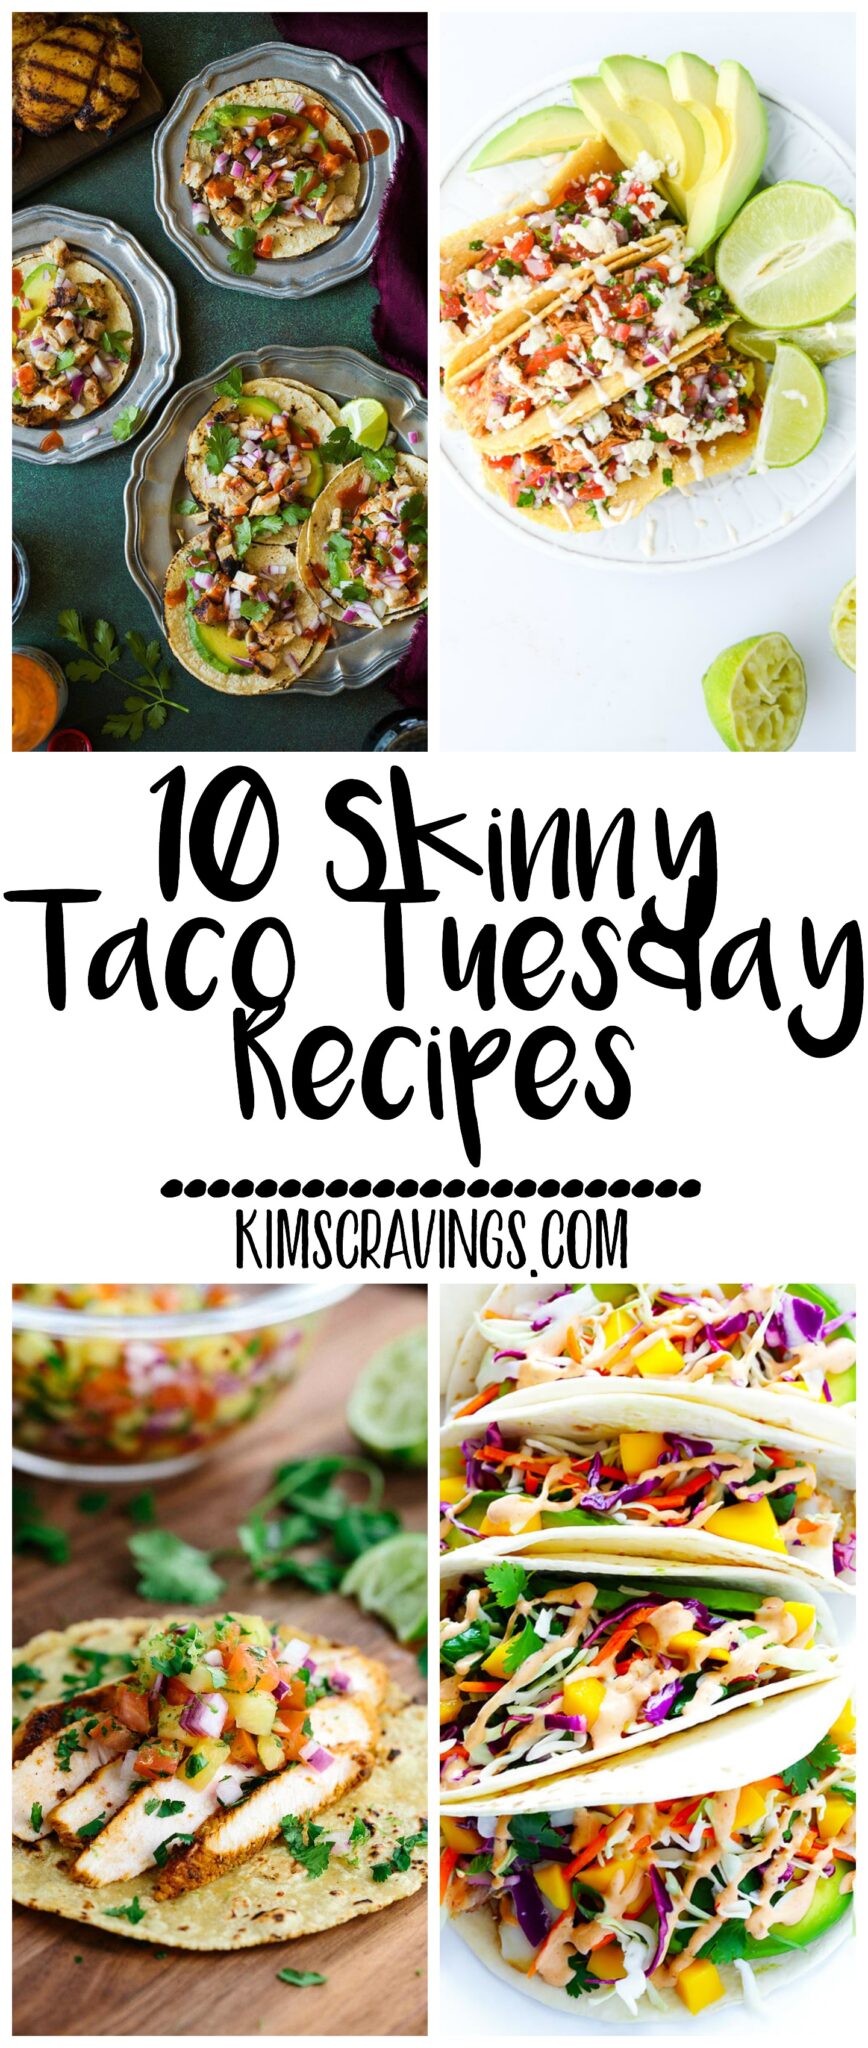 10 Skinny Taco Tuesday Recipes because in our household we LOVE mexican food and especially tacos. Whether it’s on Tuesday or some other day of the week, (because honestly usually I can’t even keep the days of the week straight!) we always have some kind of taco on our meal plan!